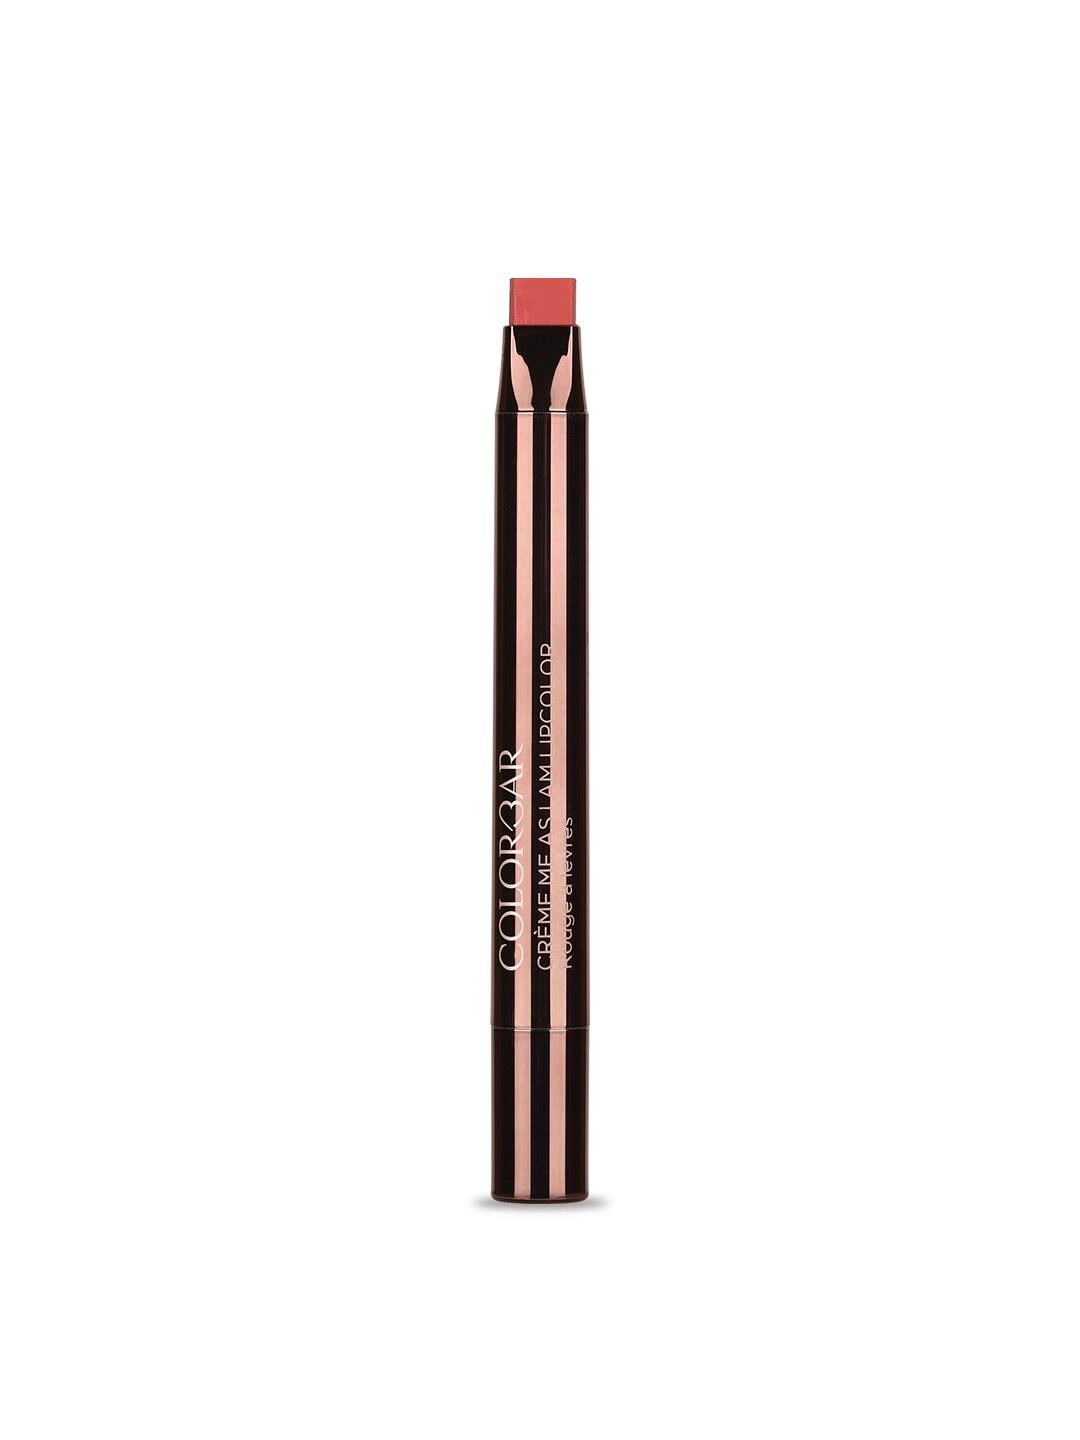 Colorbar Creme Me As I Am Long Lasting Lipstick 0.8 g - Peach Tenderly 010